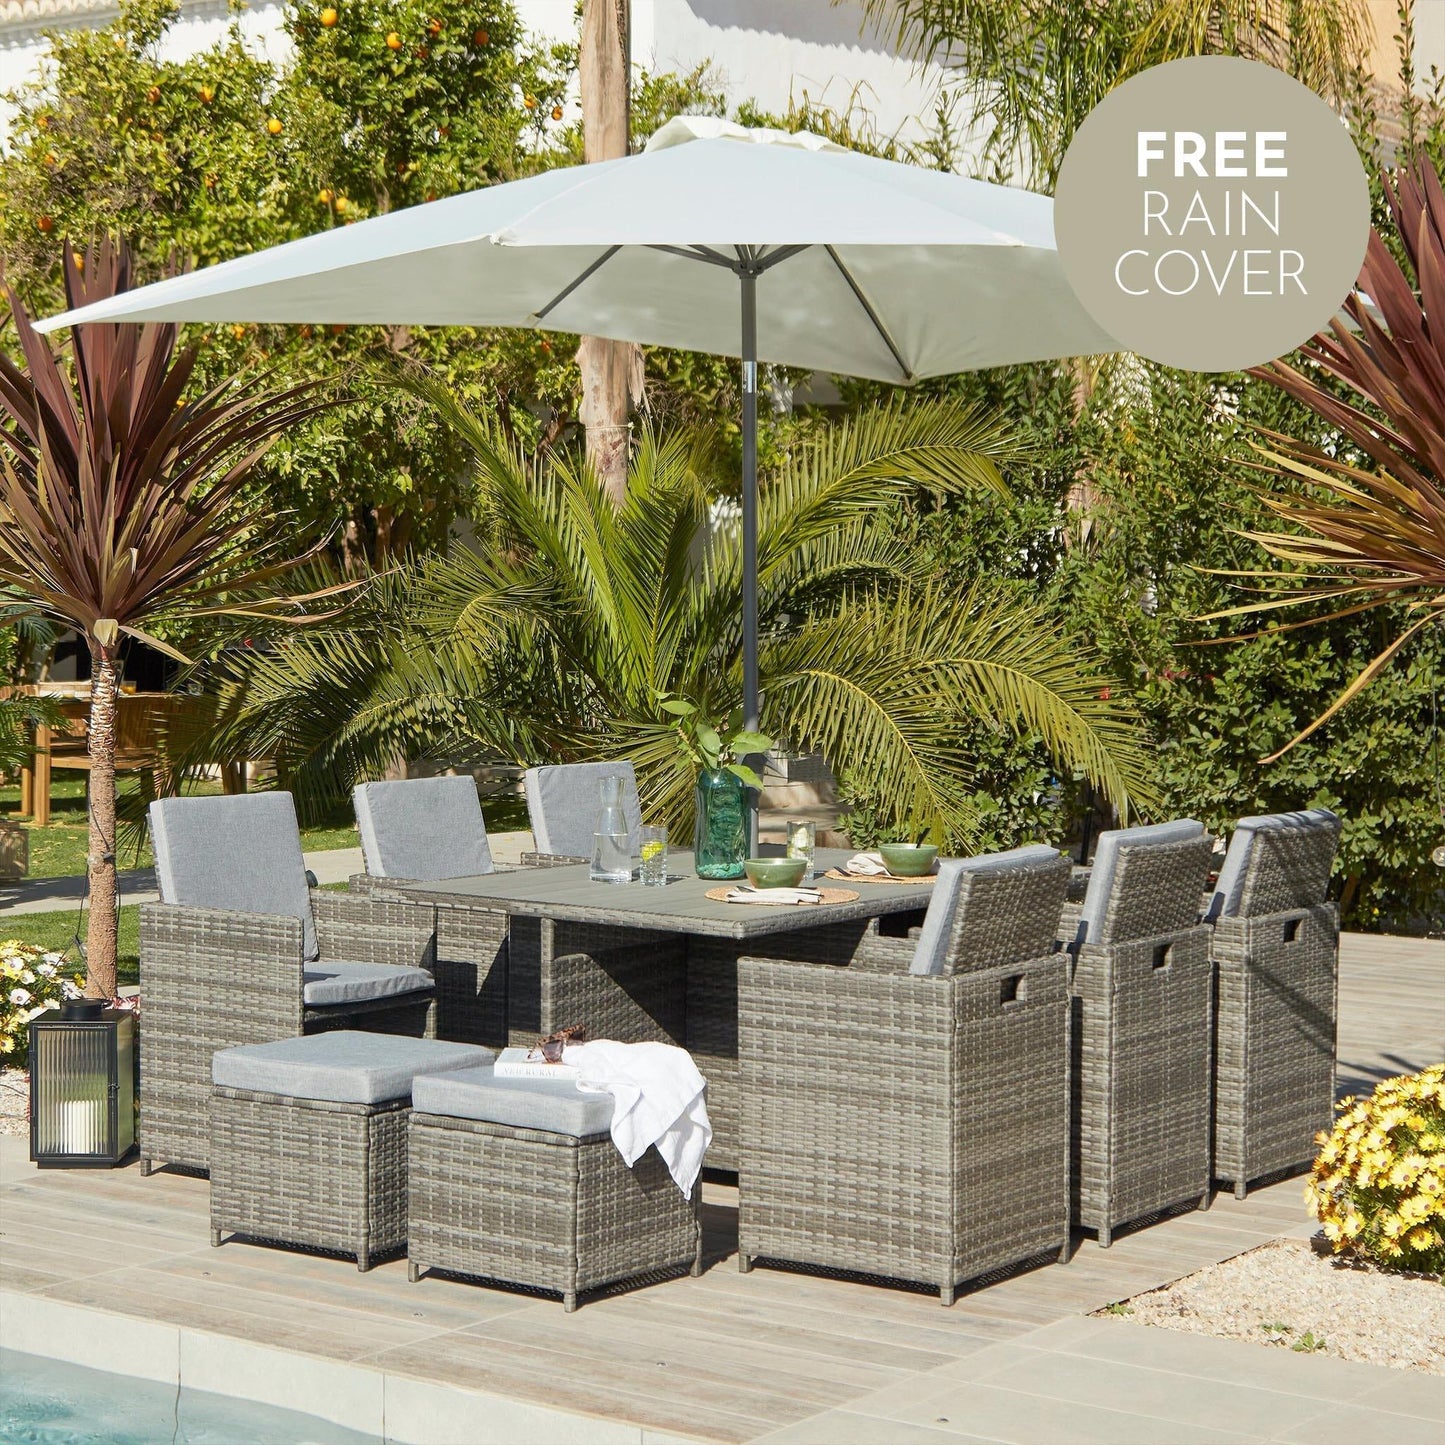 10 Seater Rattan Cube Outdoor Dining Set with Cream LED Premium Parasol - Grey Weave Polywood Top